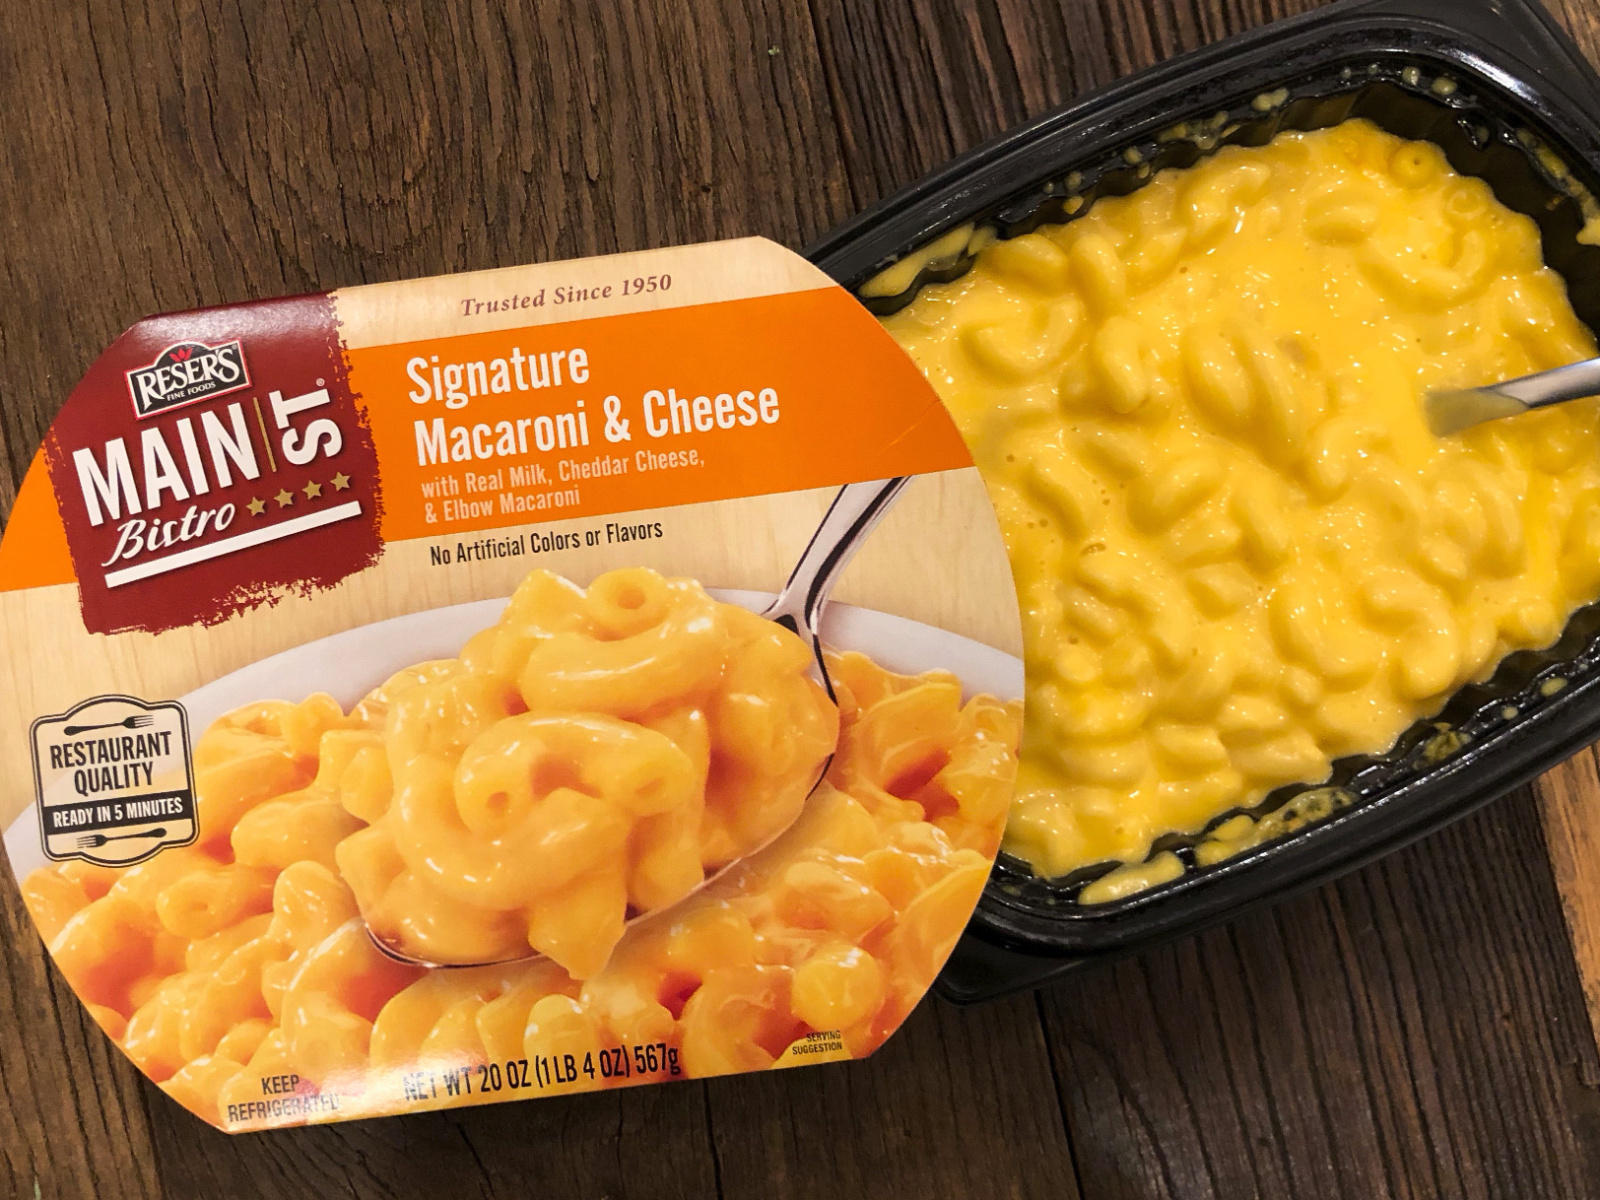 Reser’s Main St. Bistro Classic Sides Just $2.50 At Publix